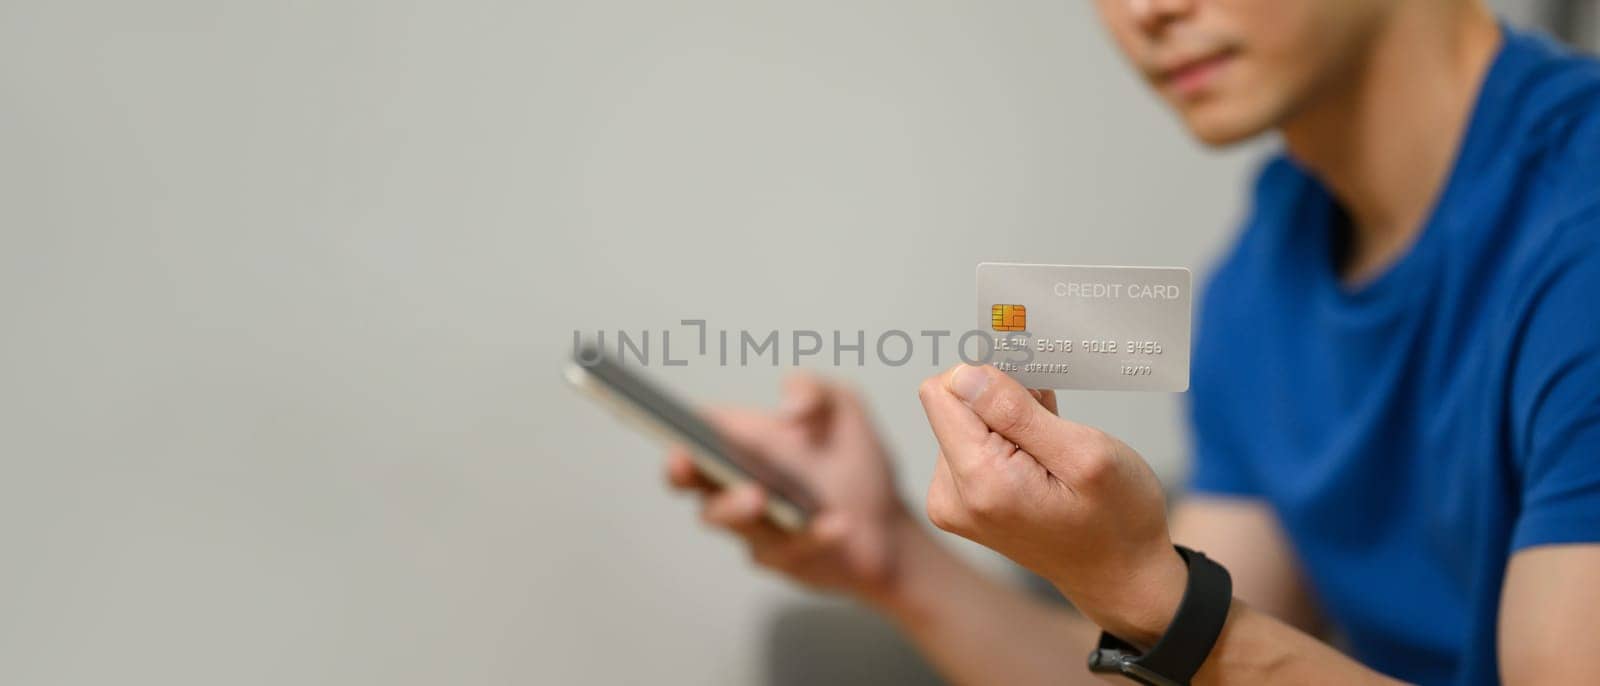 Man hand holding credit card and using smartphone for making online transactions or checking her bank account.